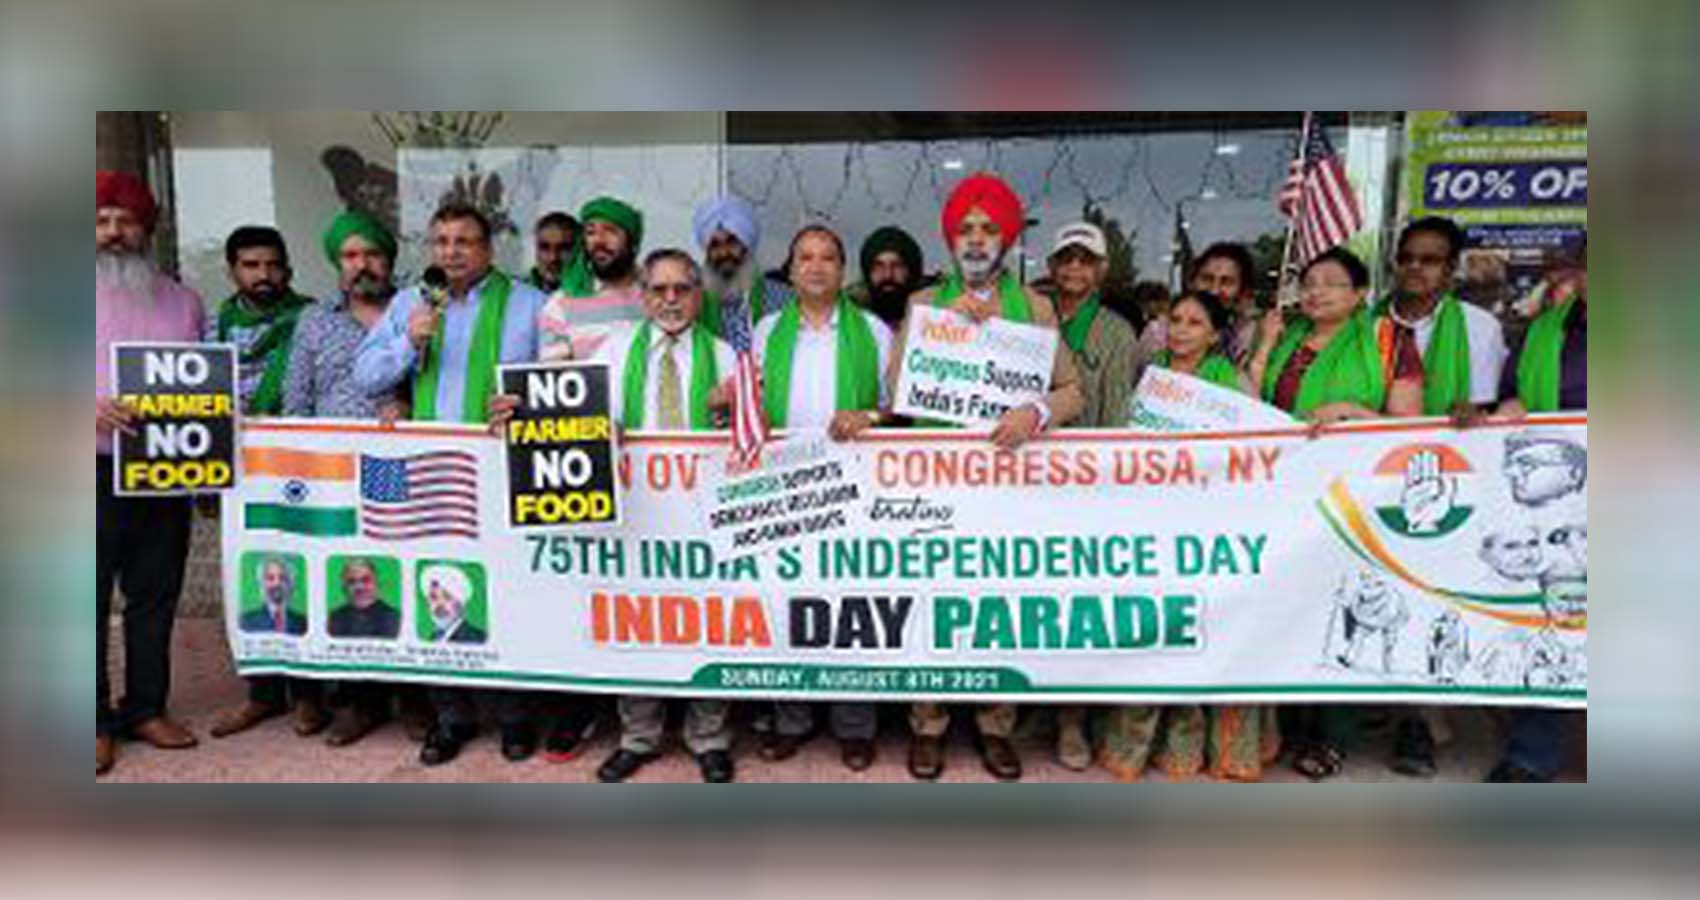 India Day Parade in New York Throws Light On Sympathizers of Farmer’s Issue in India